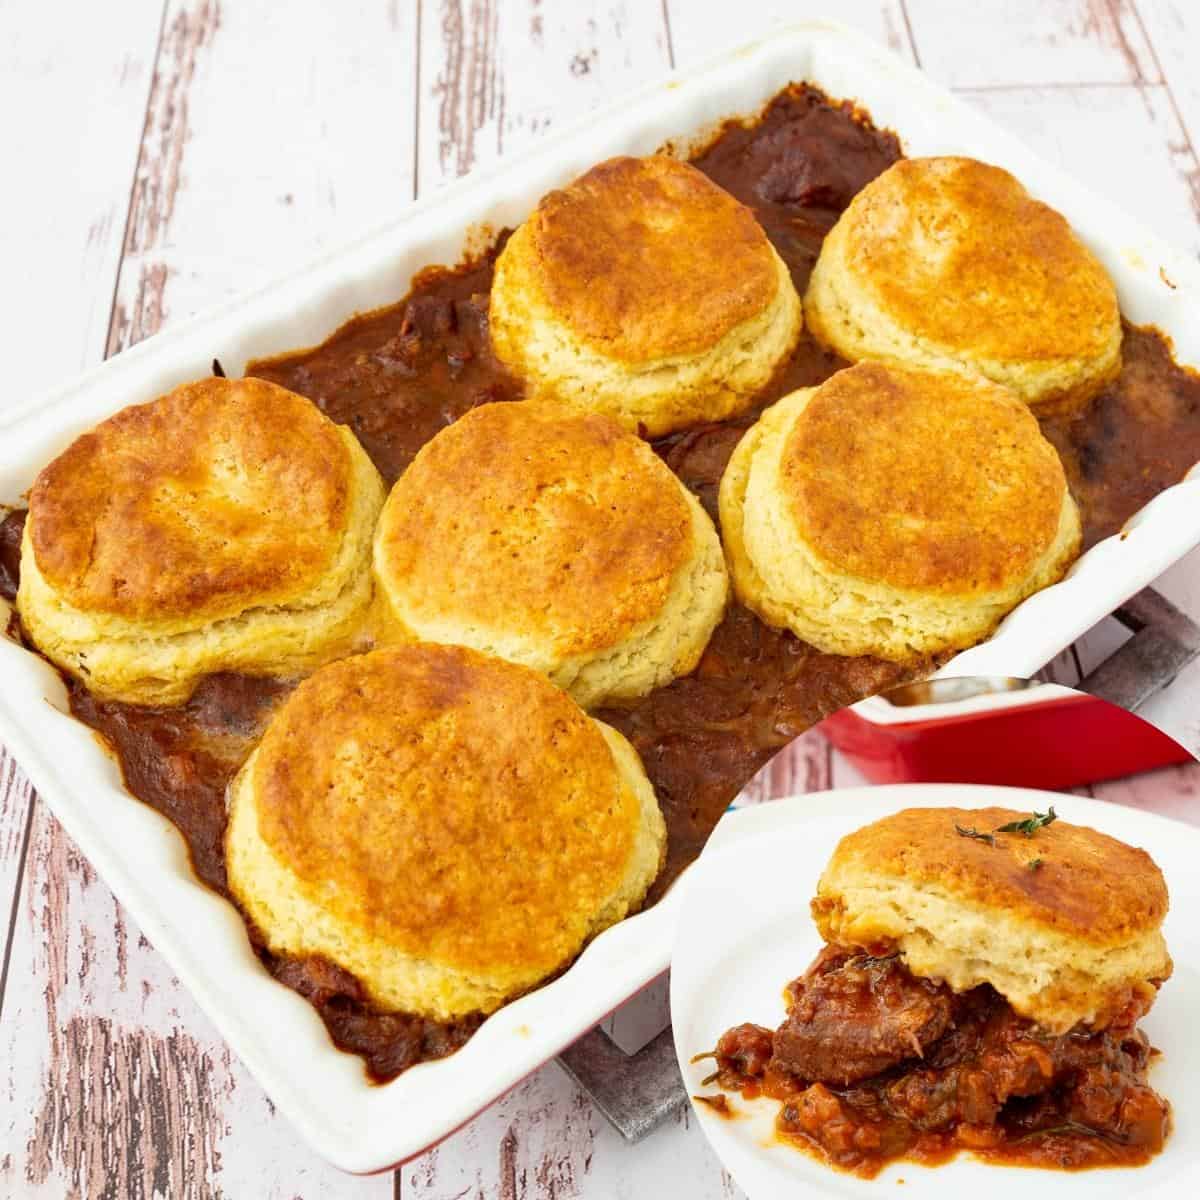 A casserole with lamb and biscuits